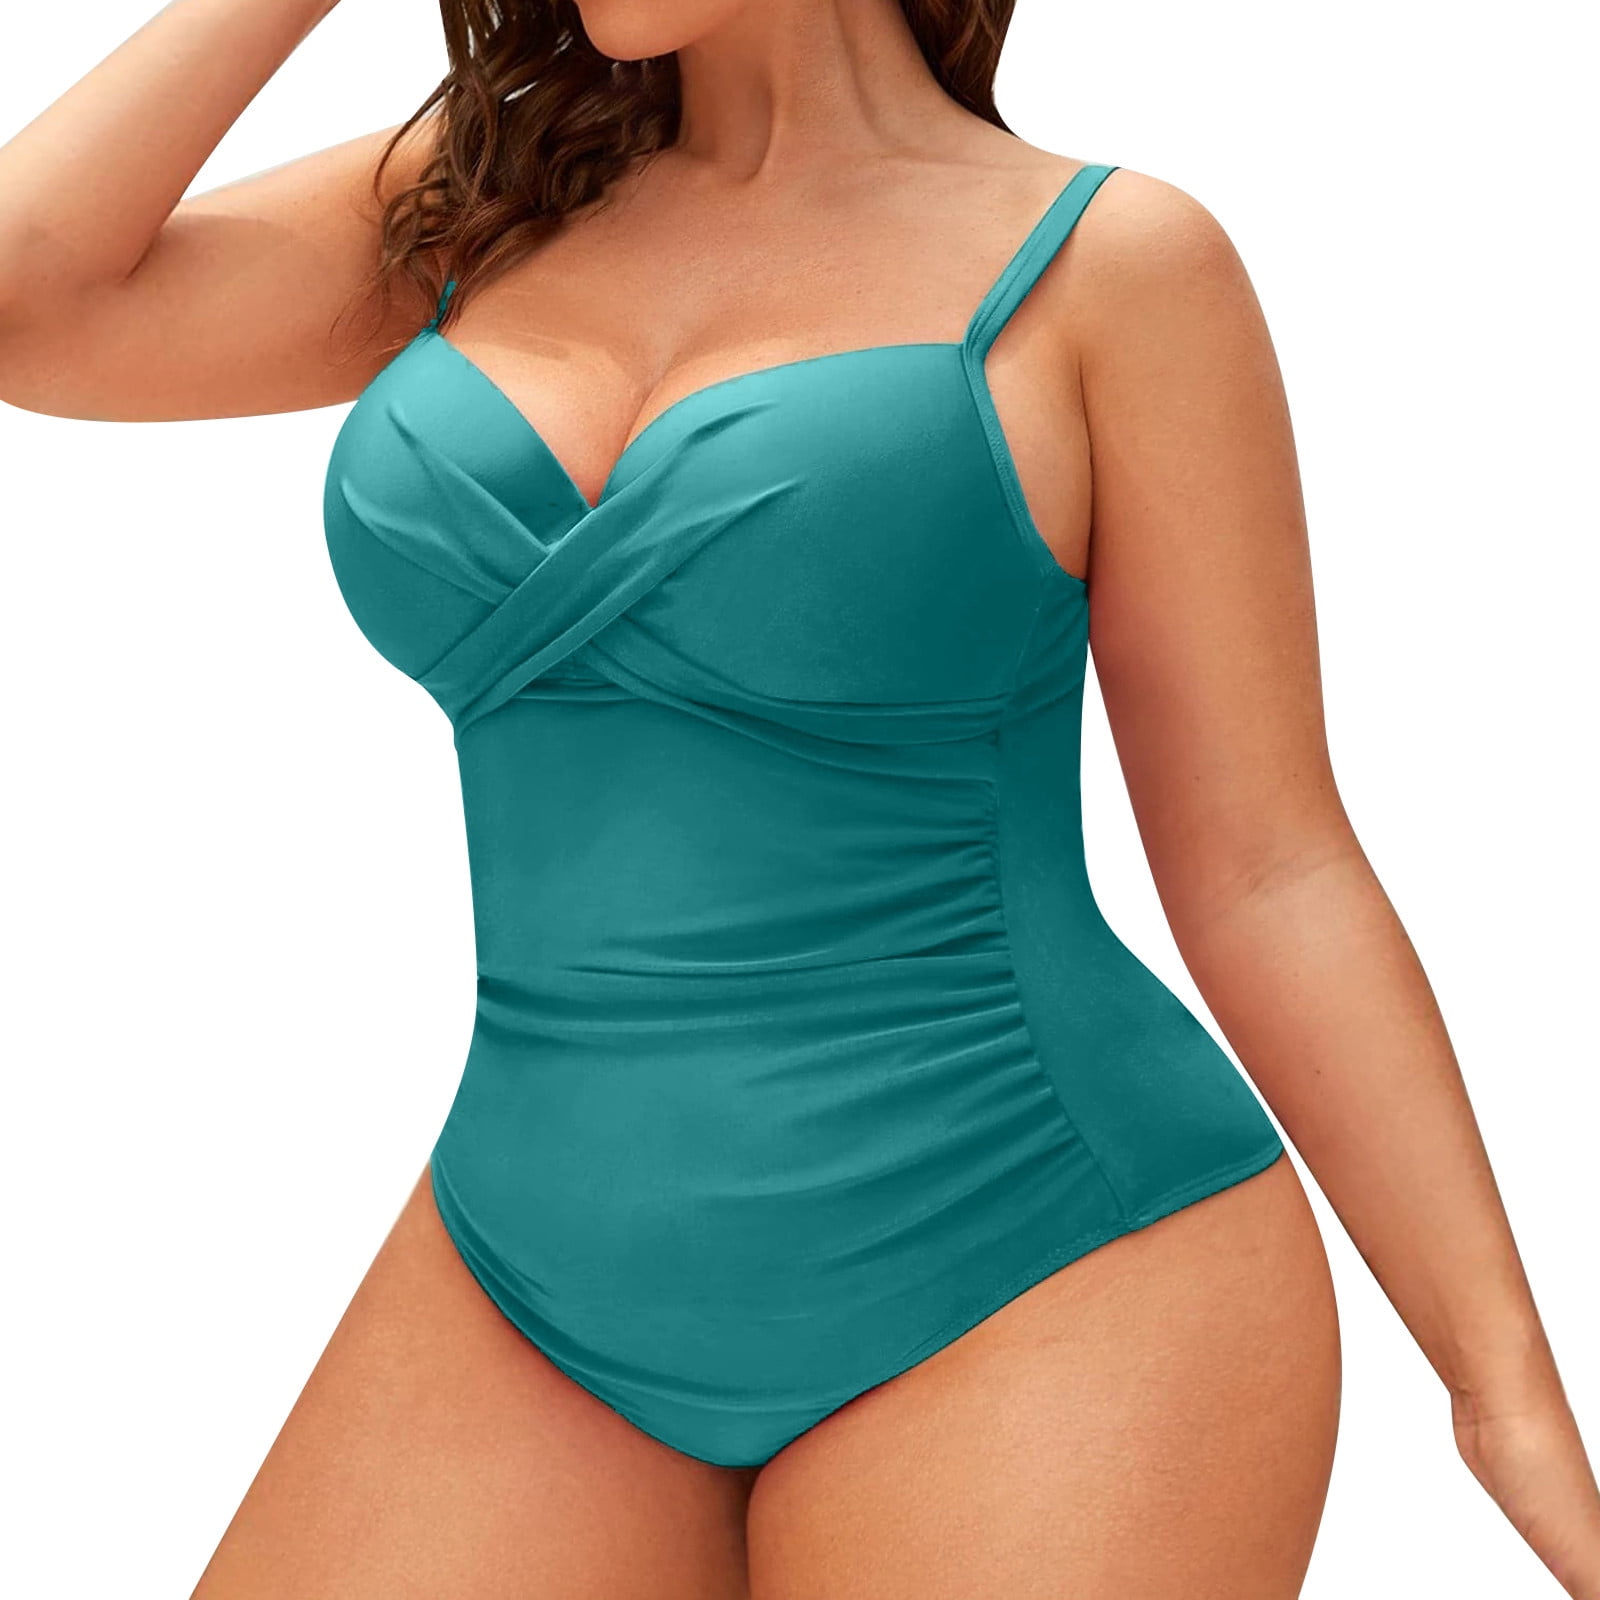 Ociviesr Women Plus Size Solid Color Bikini Ruched Detail Underwire  Removable Padded Cups Shorts for Women plus Size Supportive Bikini Tops for Large  Bust 